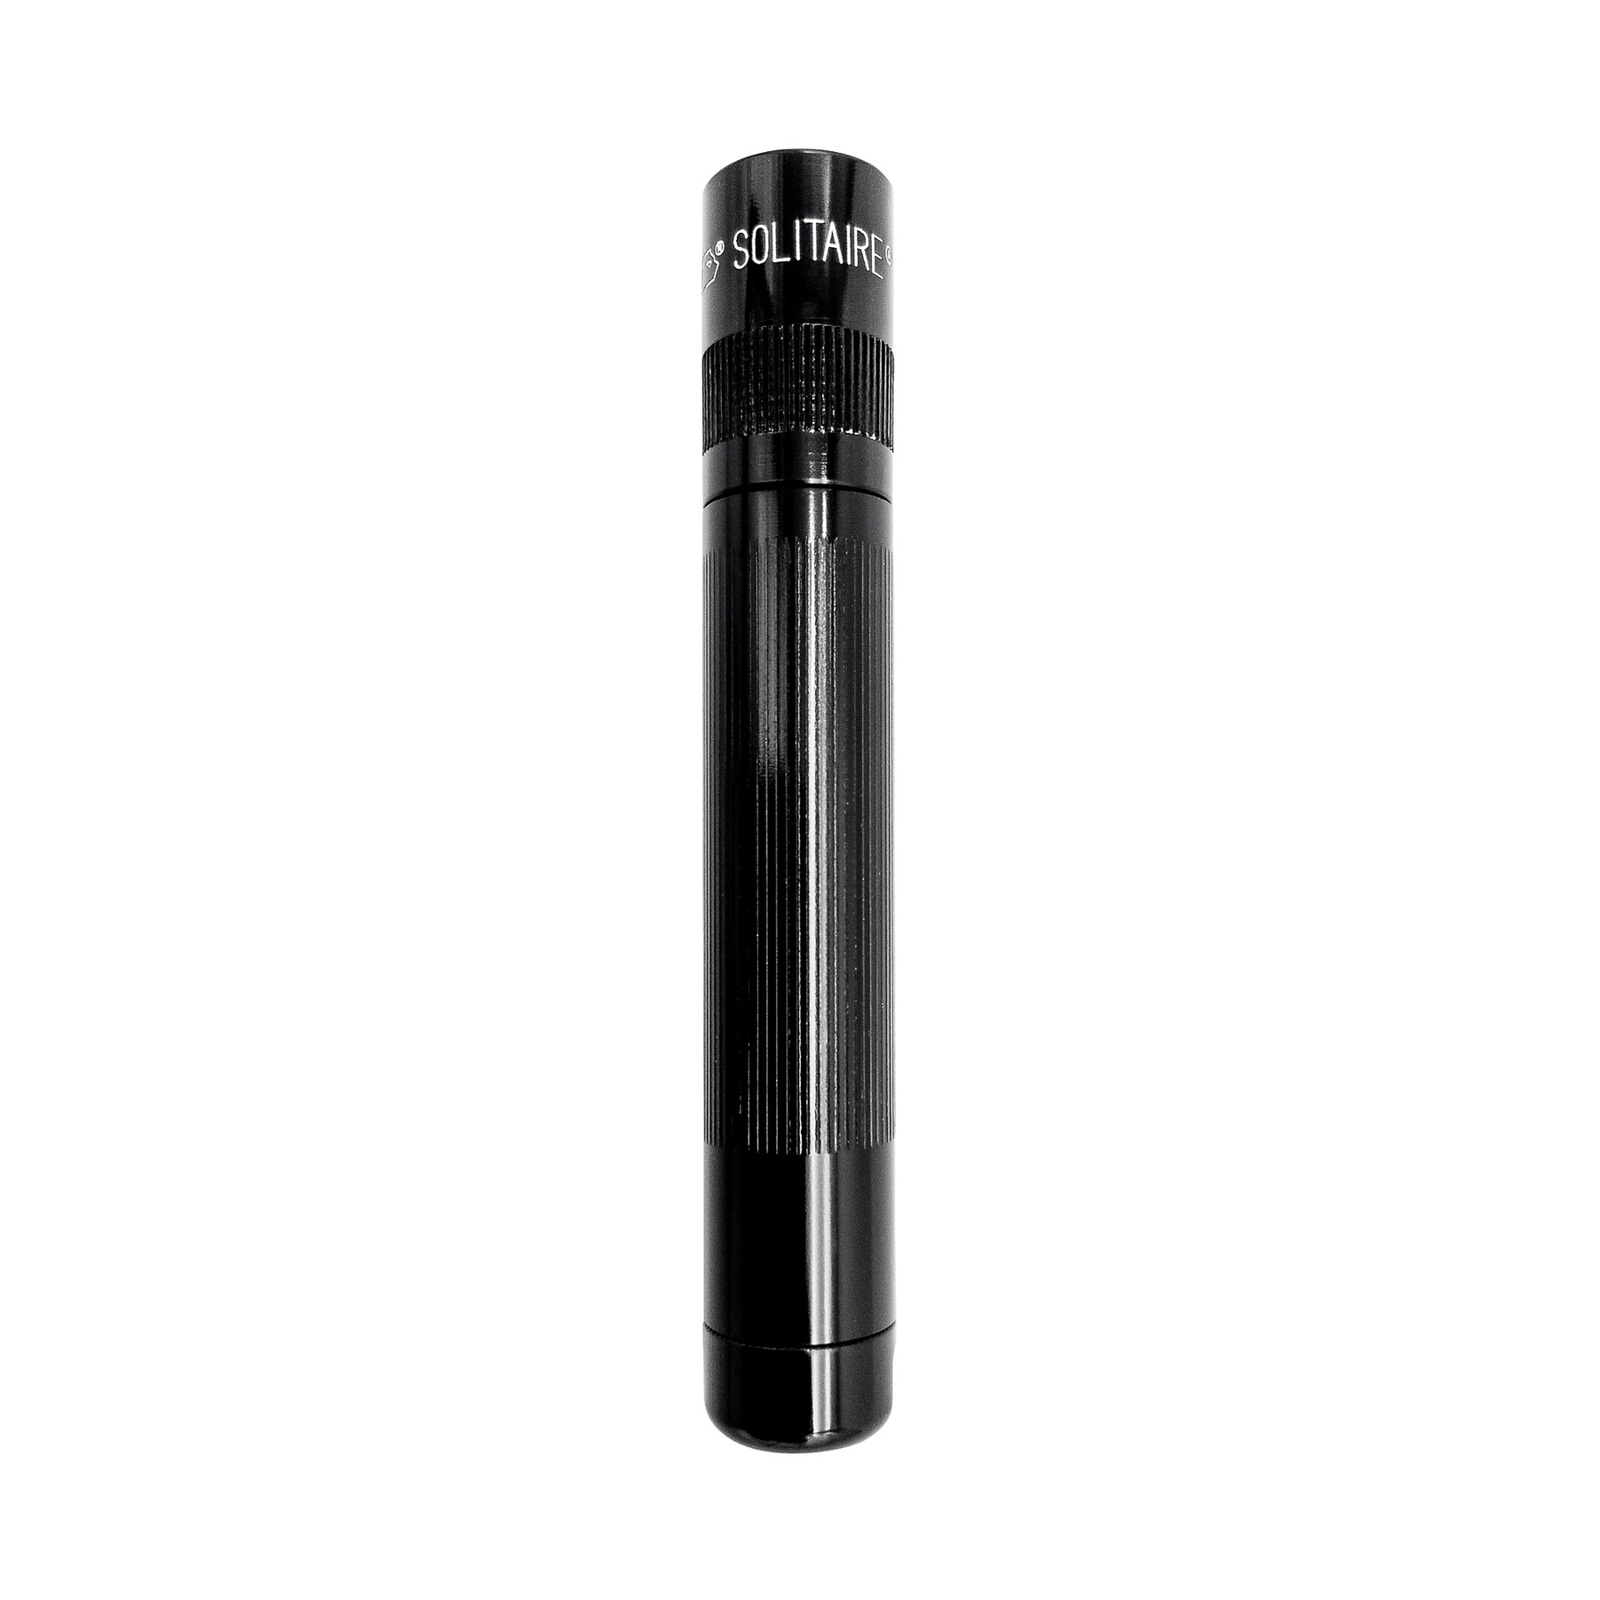 Maglite LED-ficklampa Solitaire, 1-cell AAA, svart